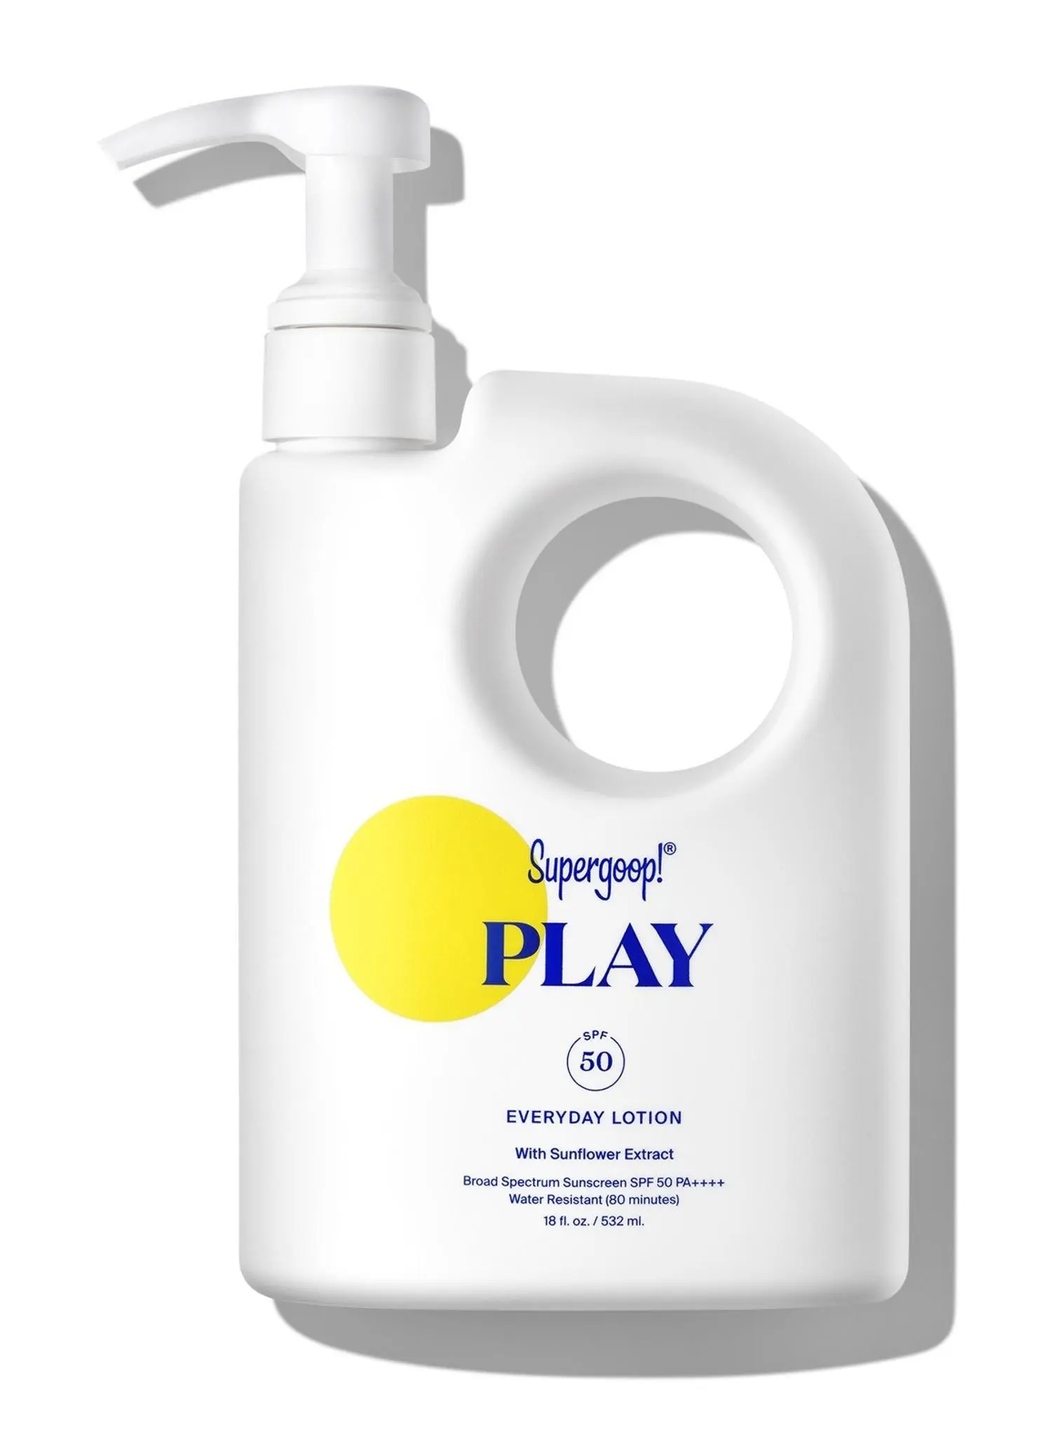 PLAY Everyday Lotion SPF 50 with Sunflower Extract, 18oz